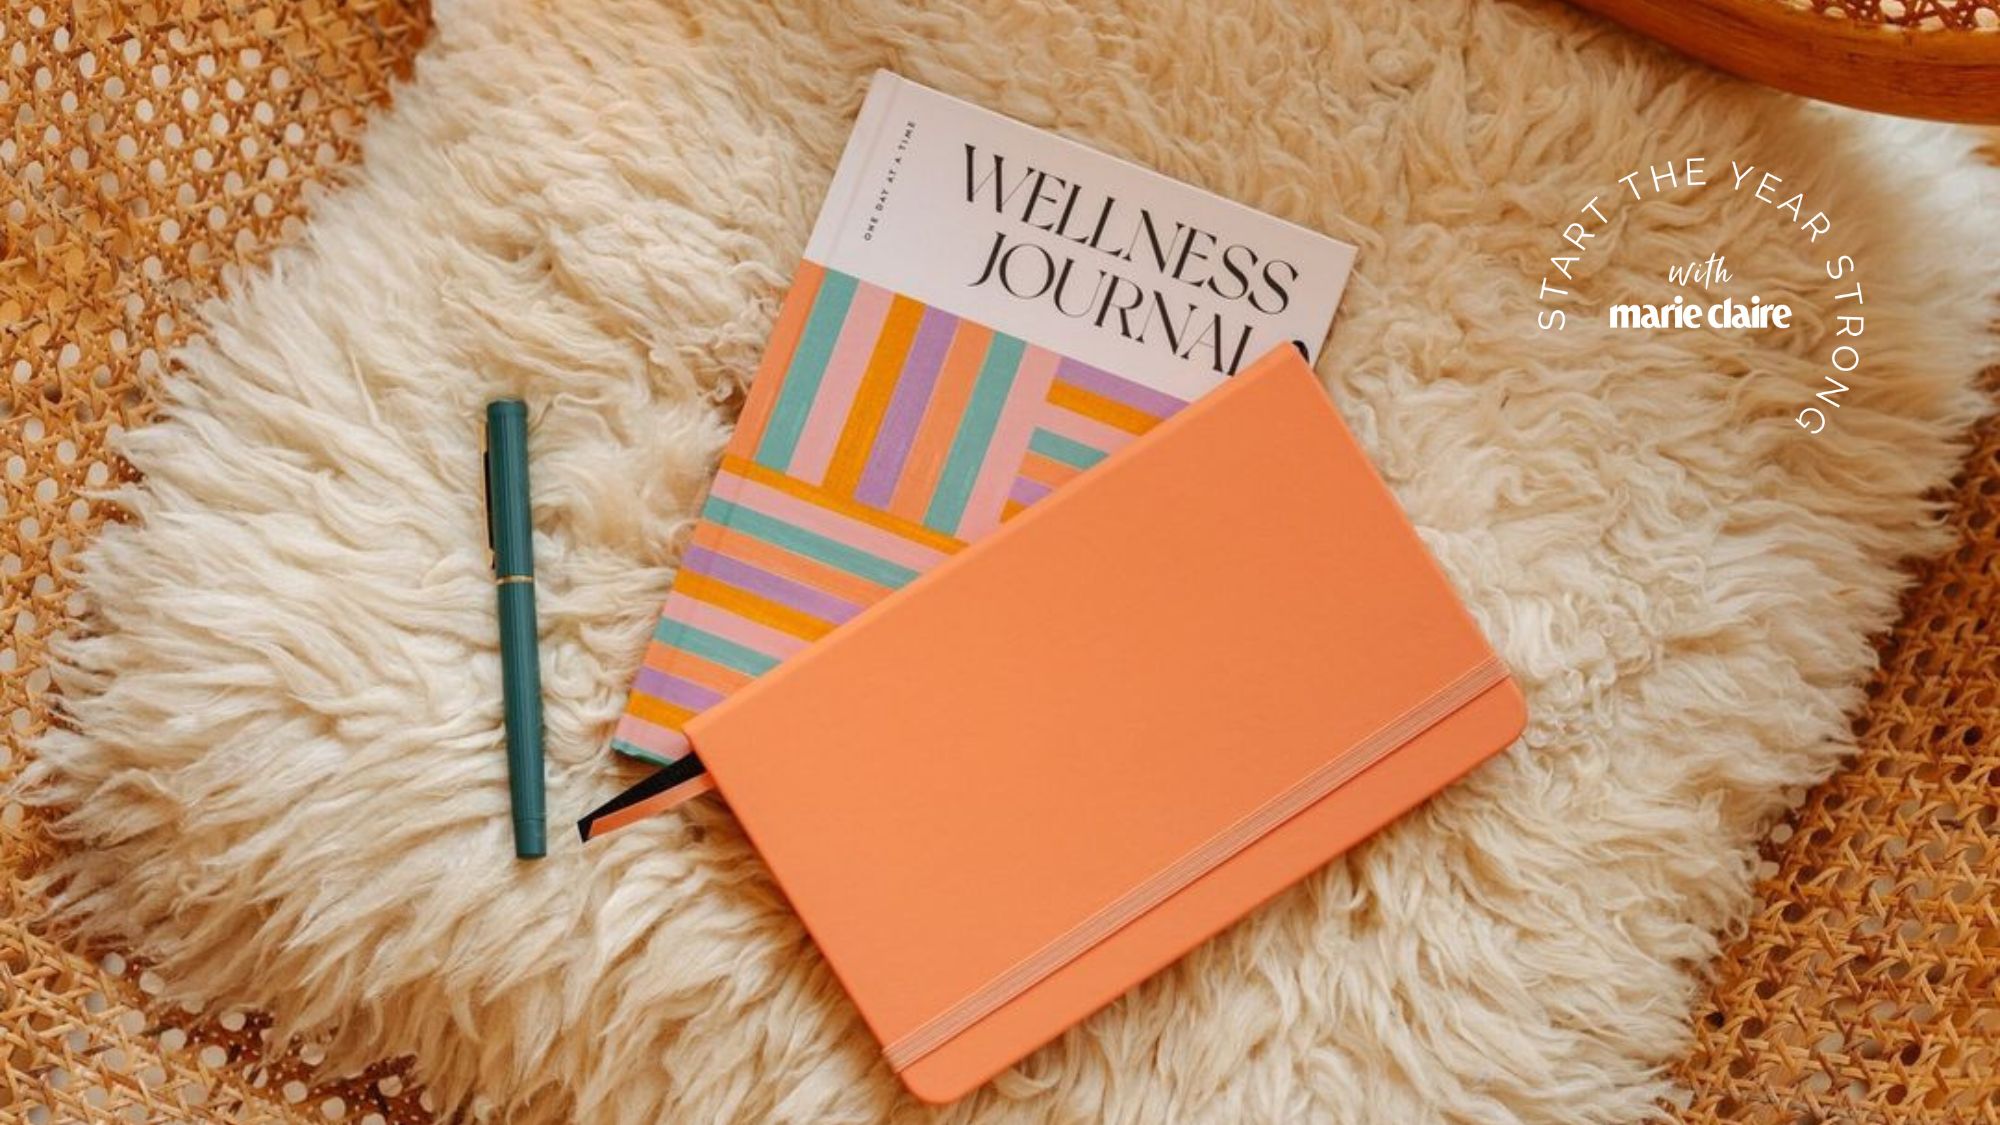 Wellness Journal Ideas for Positive Health and Wellbeing